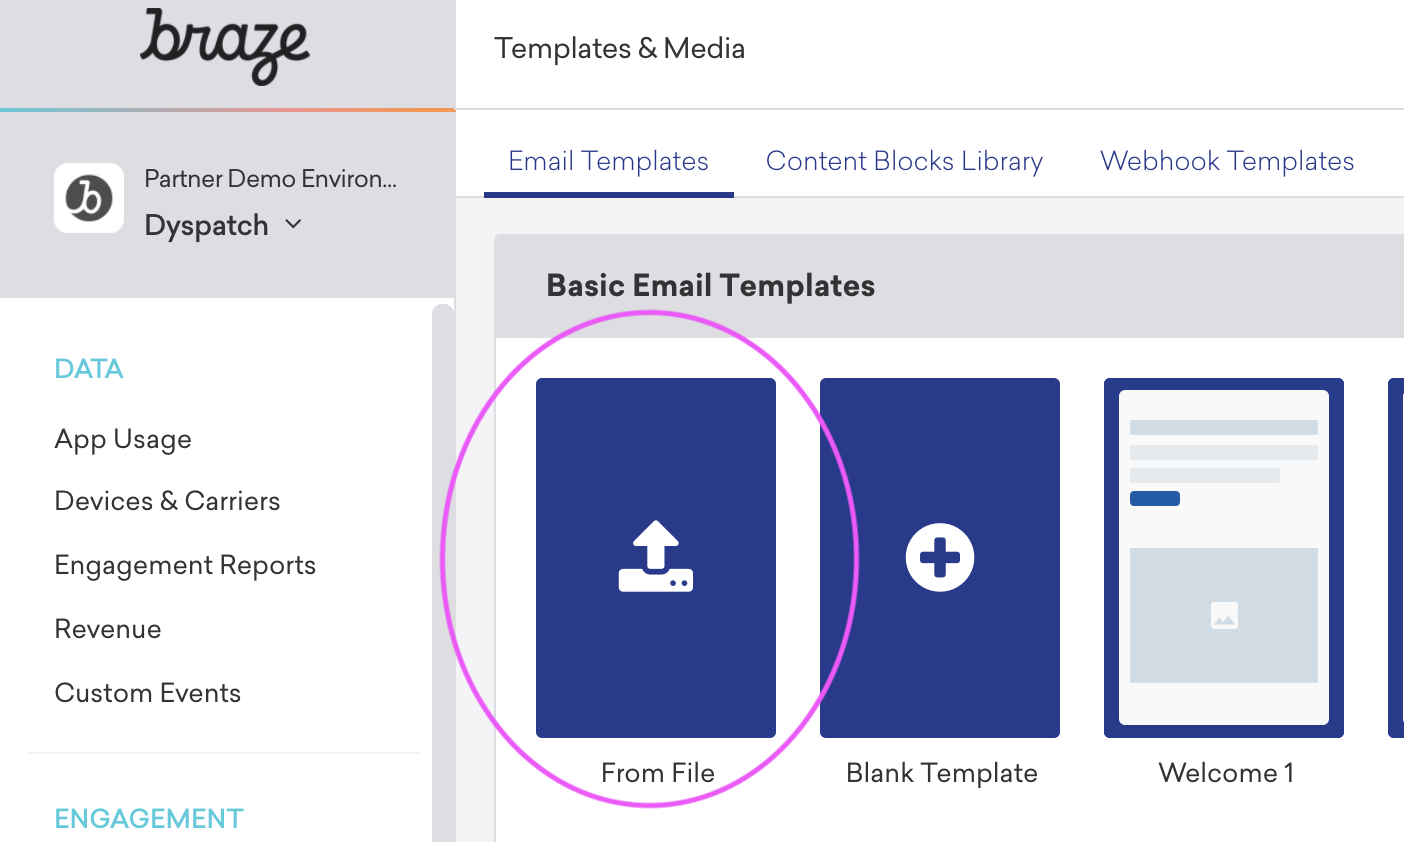 Click the From File option in the Templates & Media Section